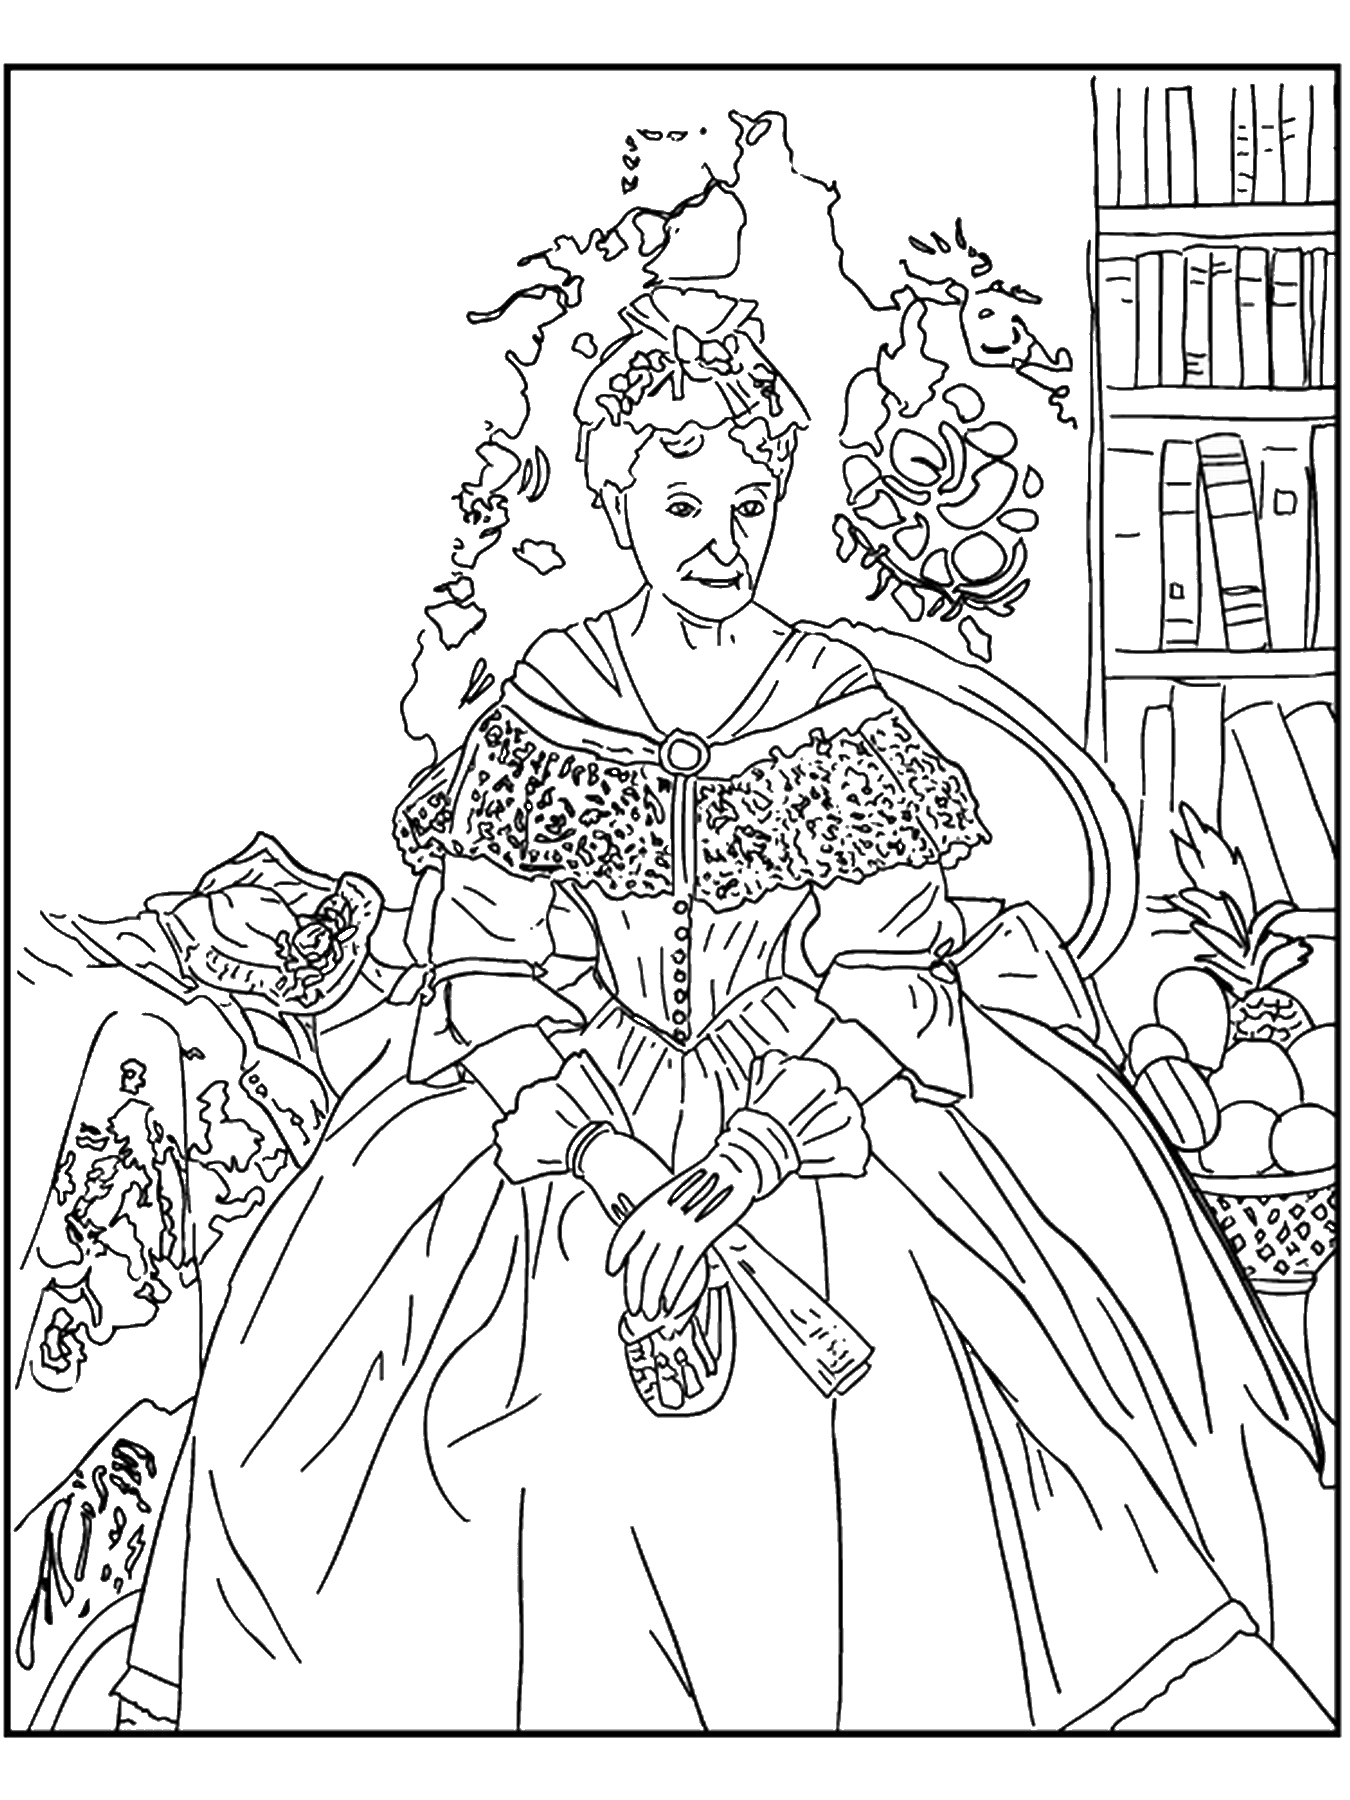 famous artists coloring pages famous artists and their coloring coloring pages coloring famous pages artists 